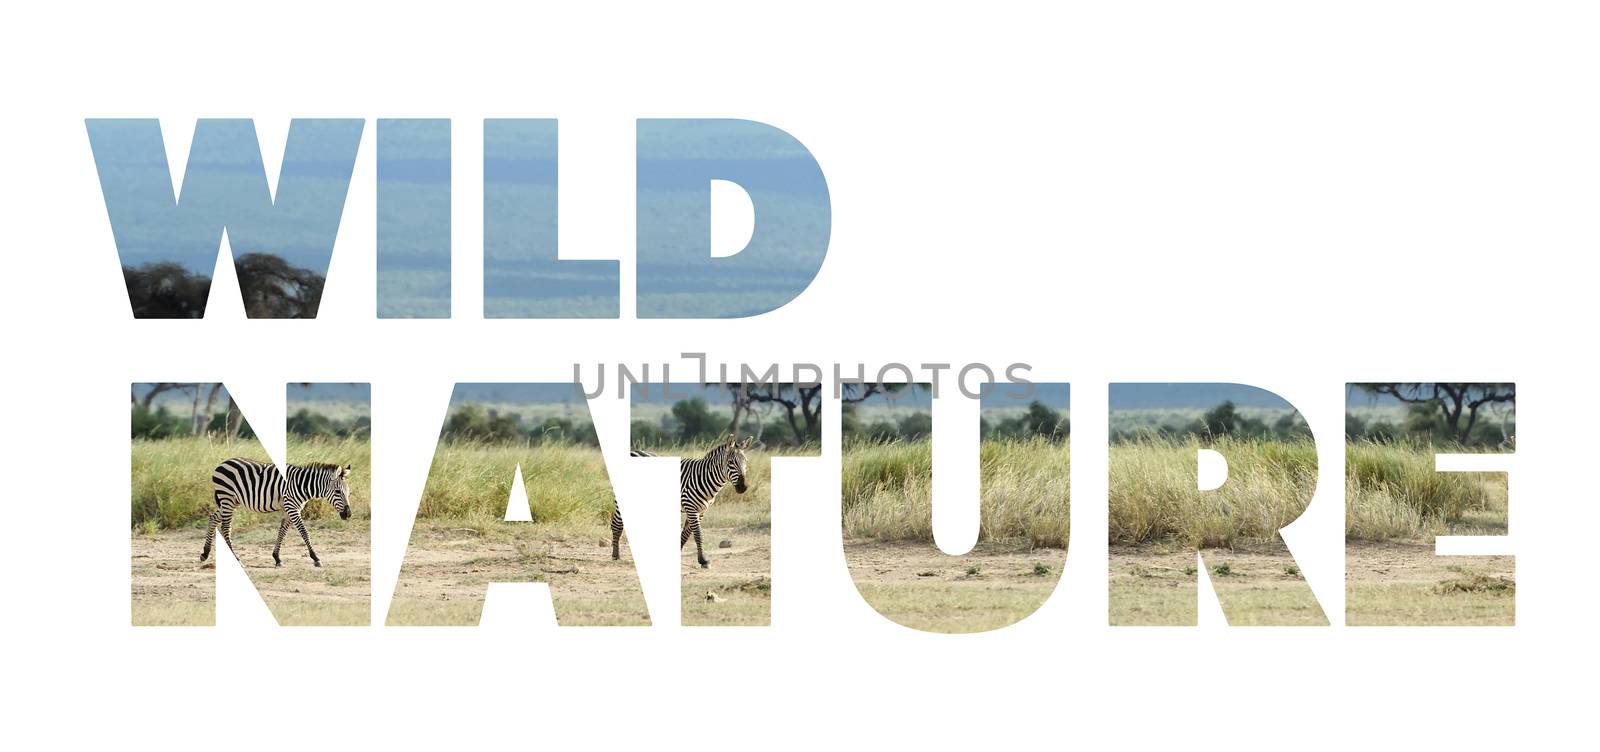 Background with word "Wild nature". Letters are made of animals